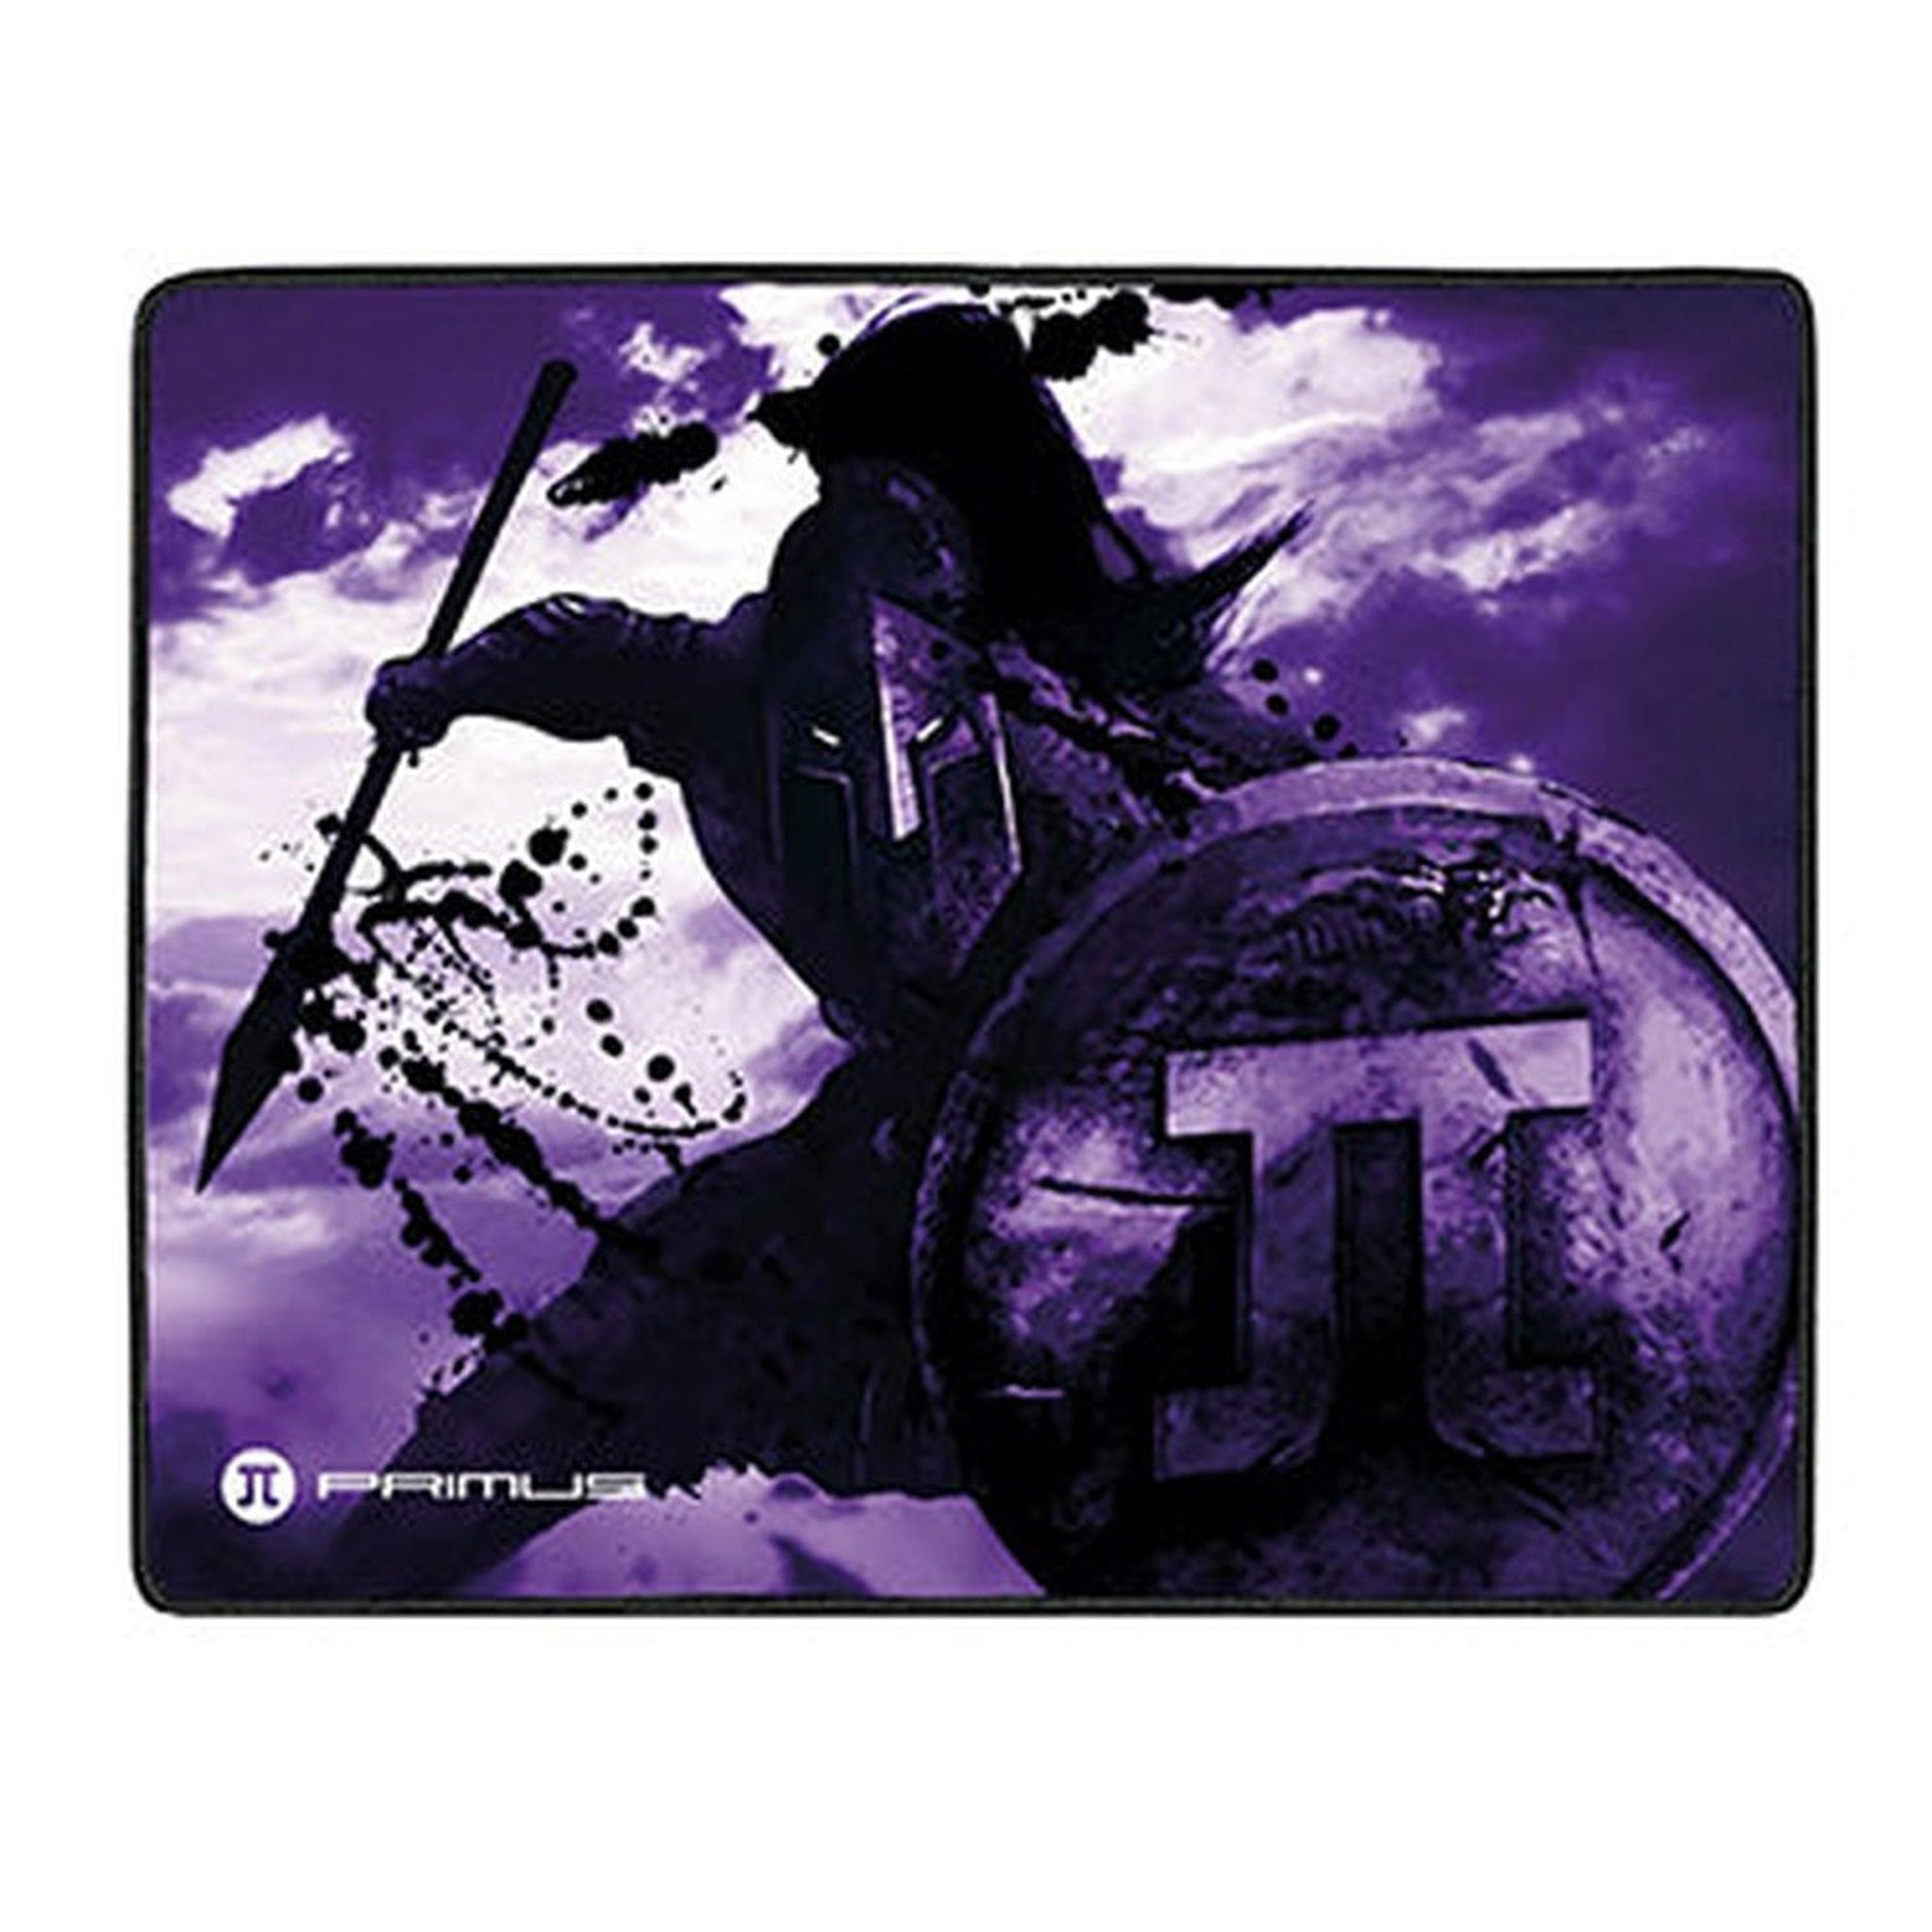 Primus Gaming Mouse Pad Arena Large Gladiator Battle 15.7 X 12.5 IN